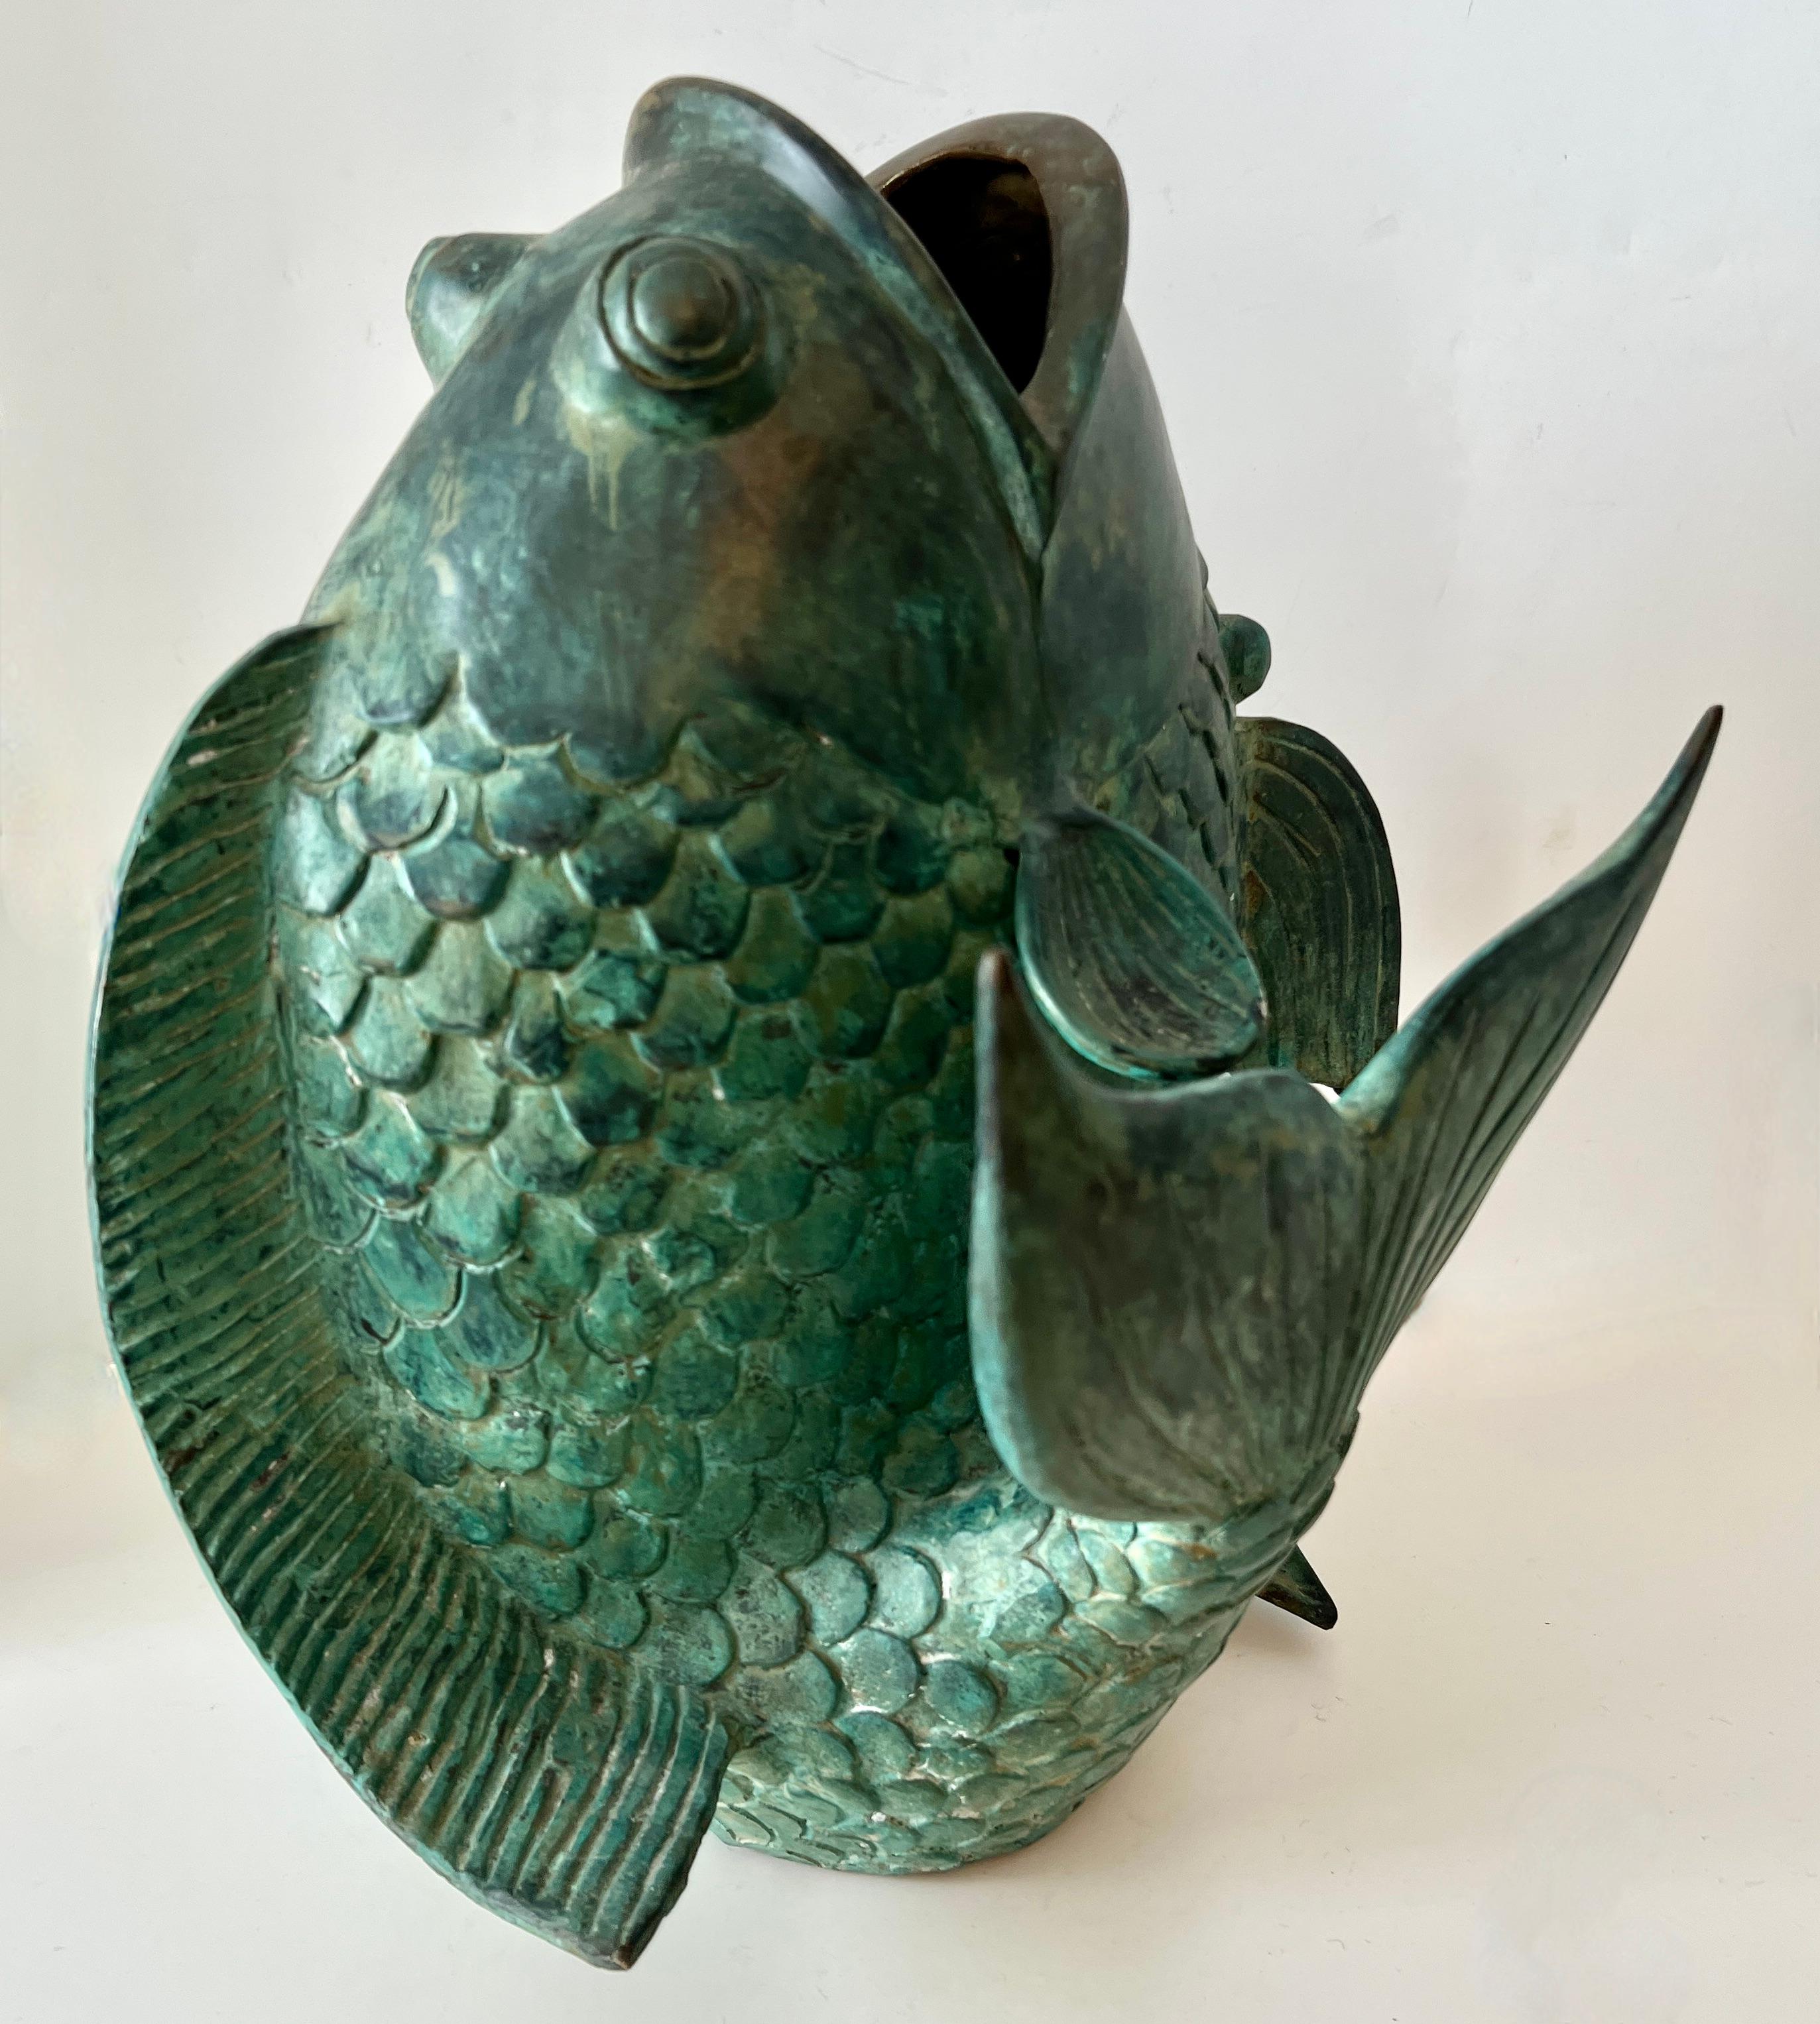 Hand-Crafted Bronze Koi Fish Sculpture Vase or Fountain For Sale